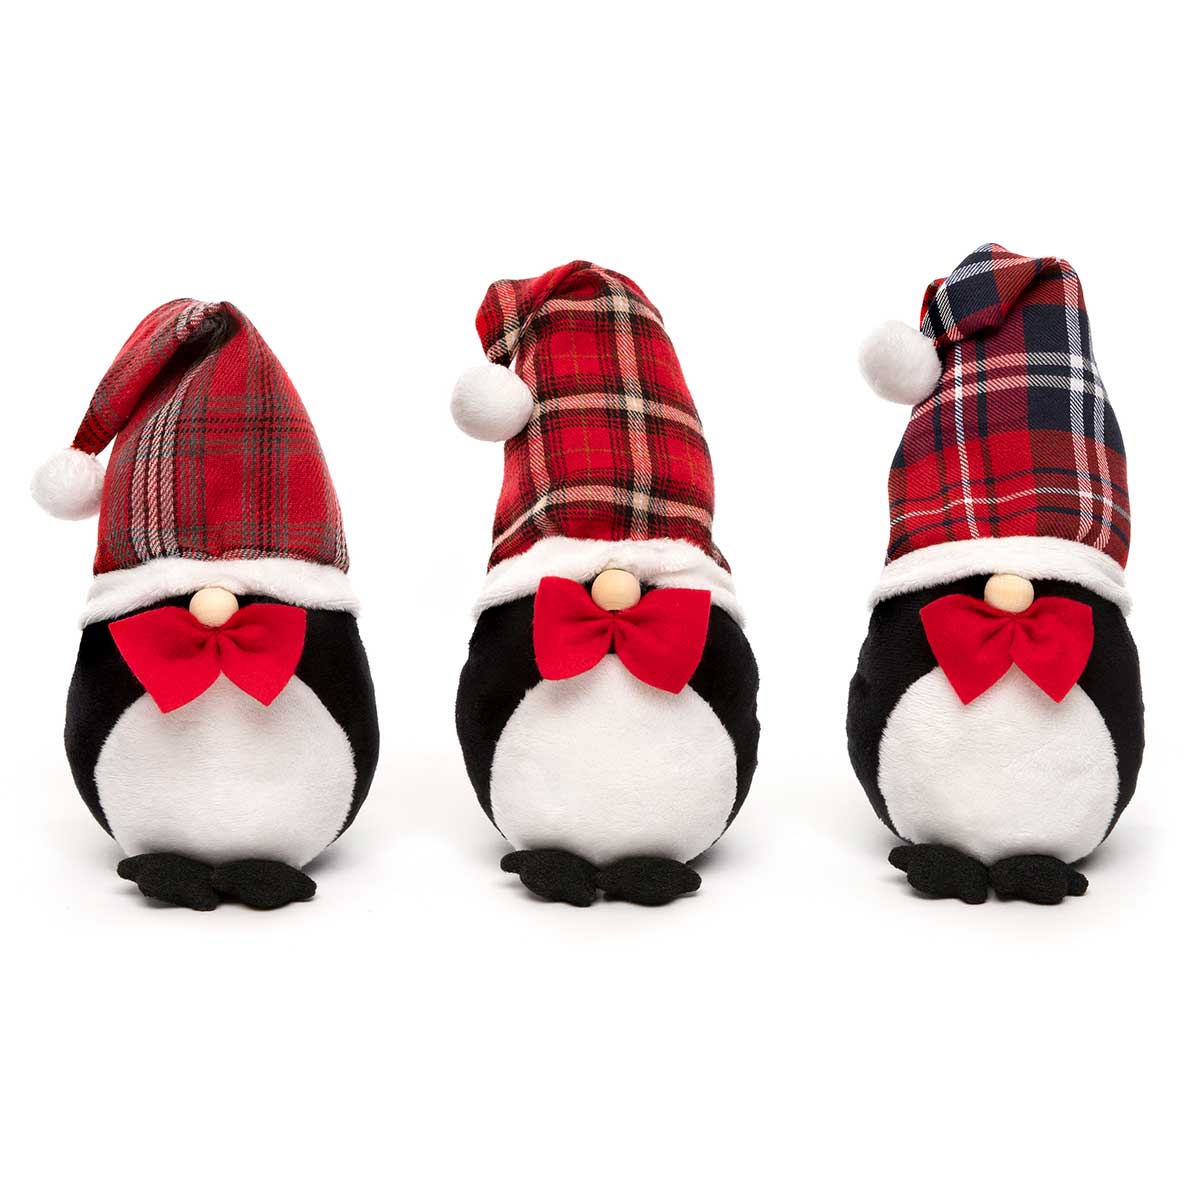 PENGUIN PARADE GNOME WITH BOWTIE 3 AST LARGE